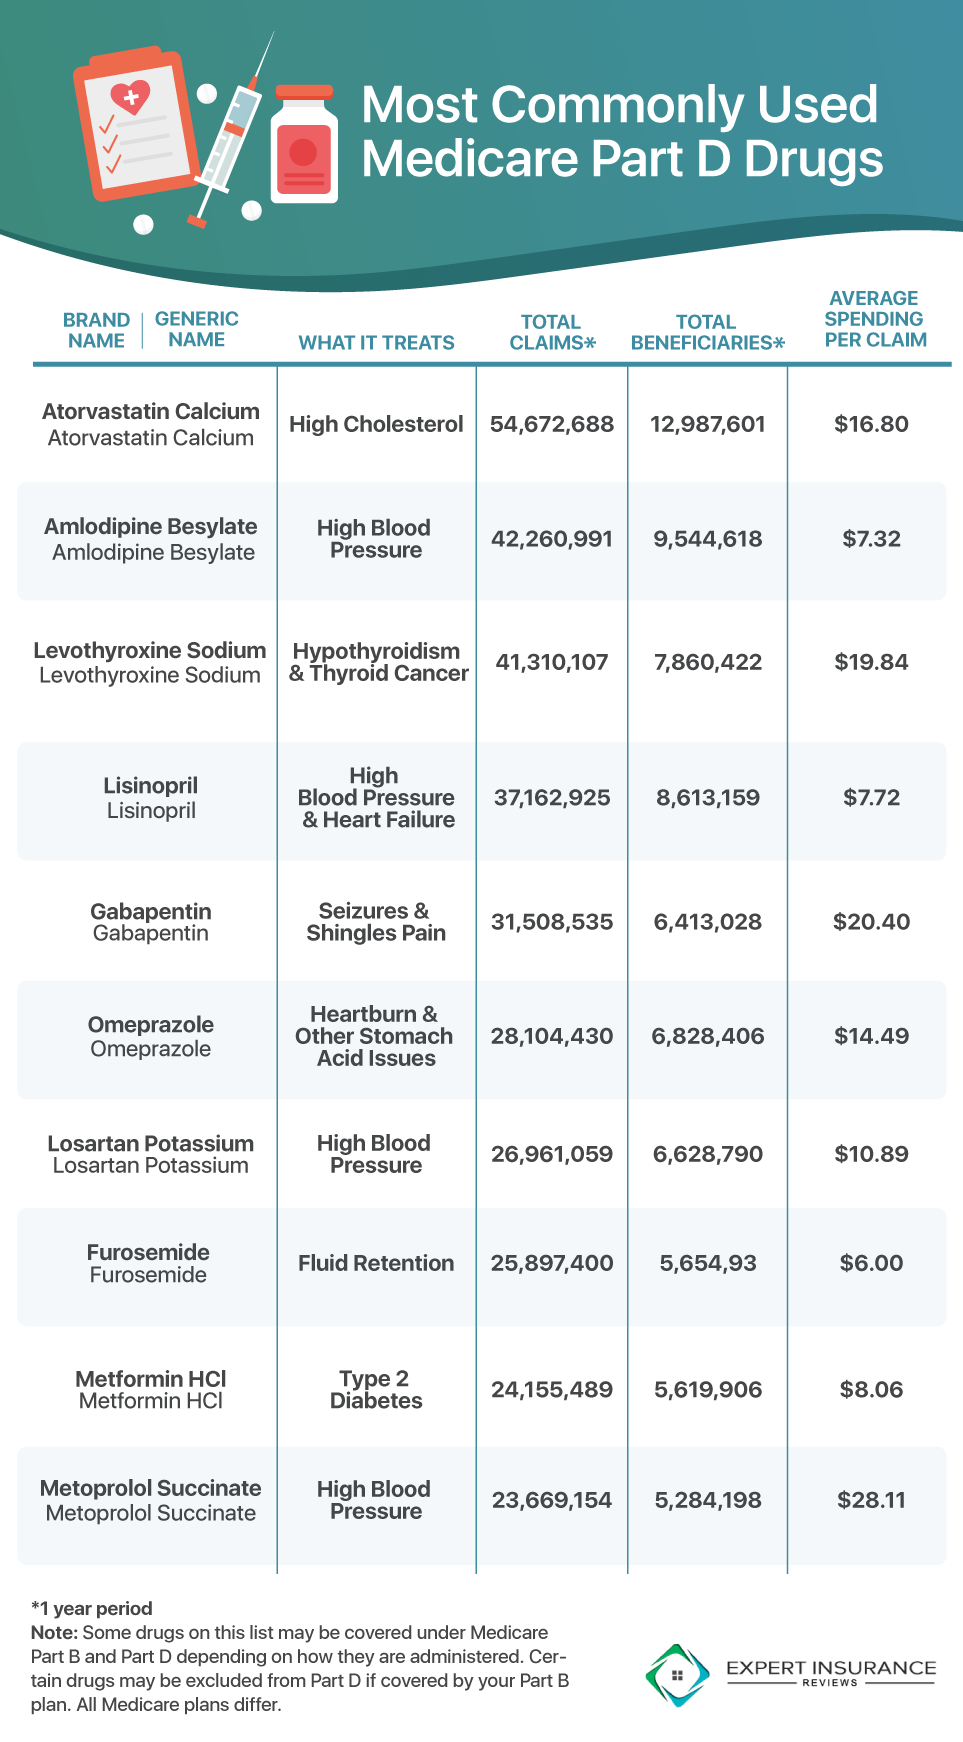 Most Commonly Used Medicare Part D Drugs